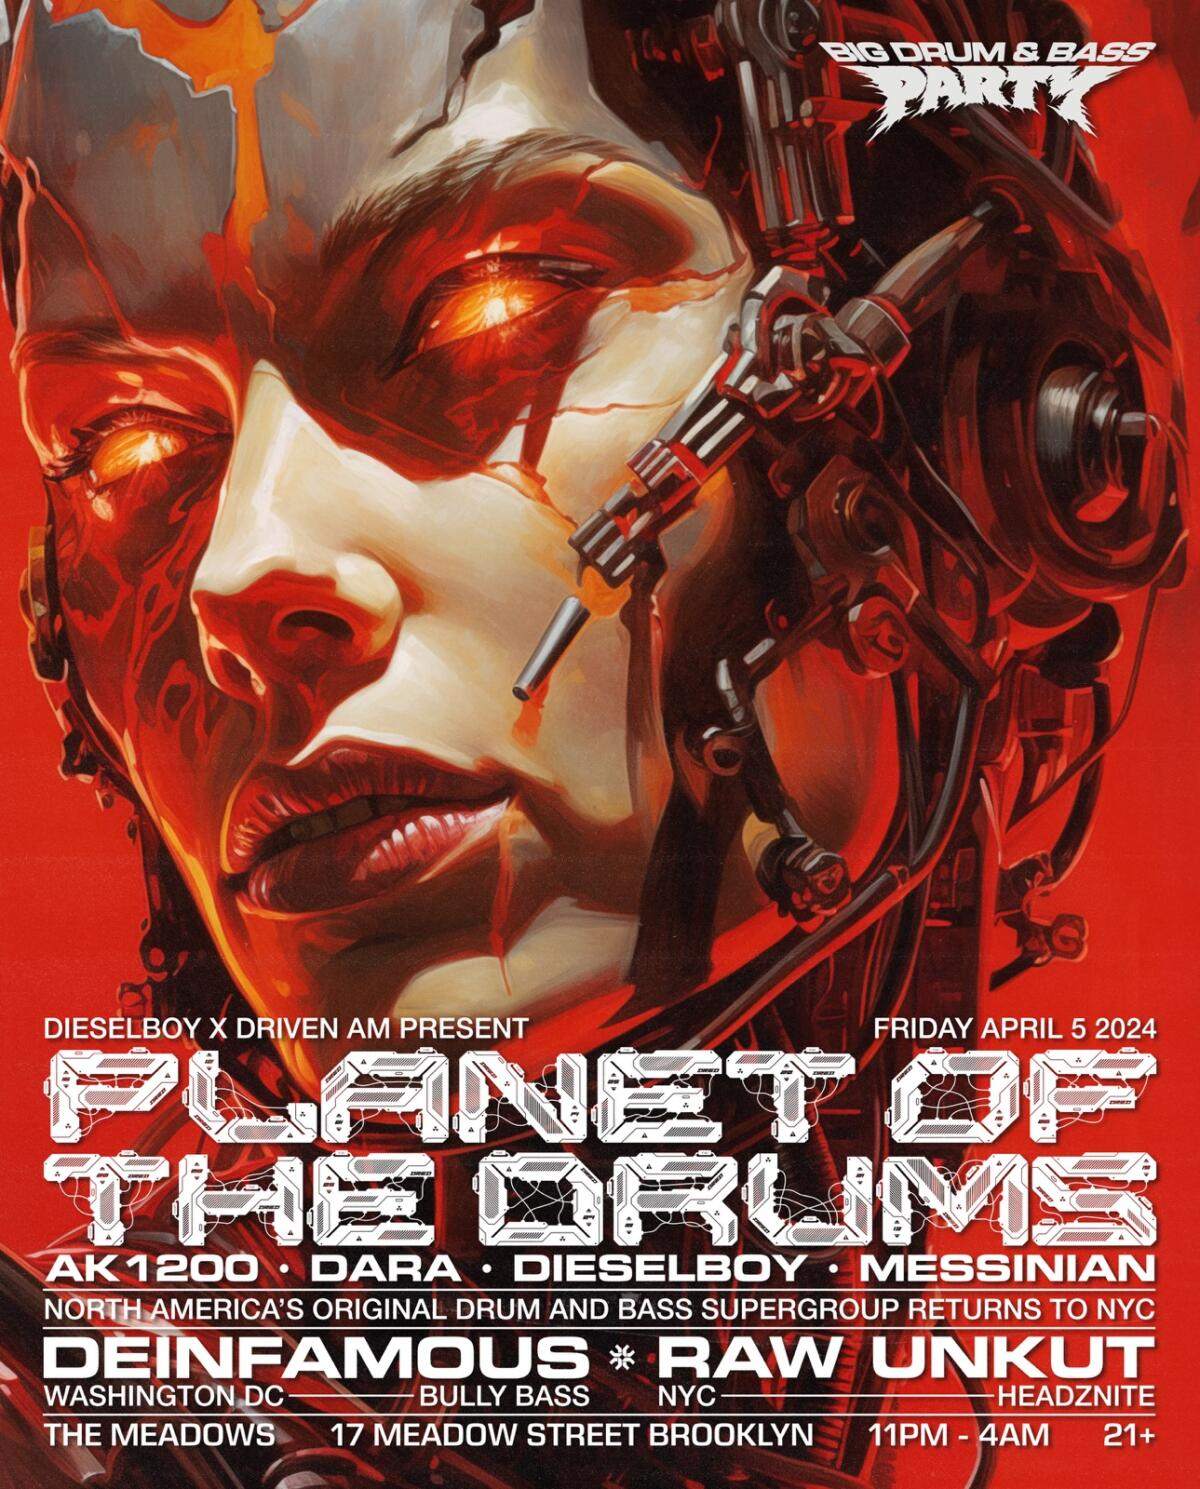 PLANET OF THE DRUMS at Big Drum & Bass Party - Página frontal